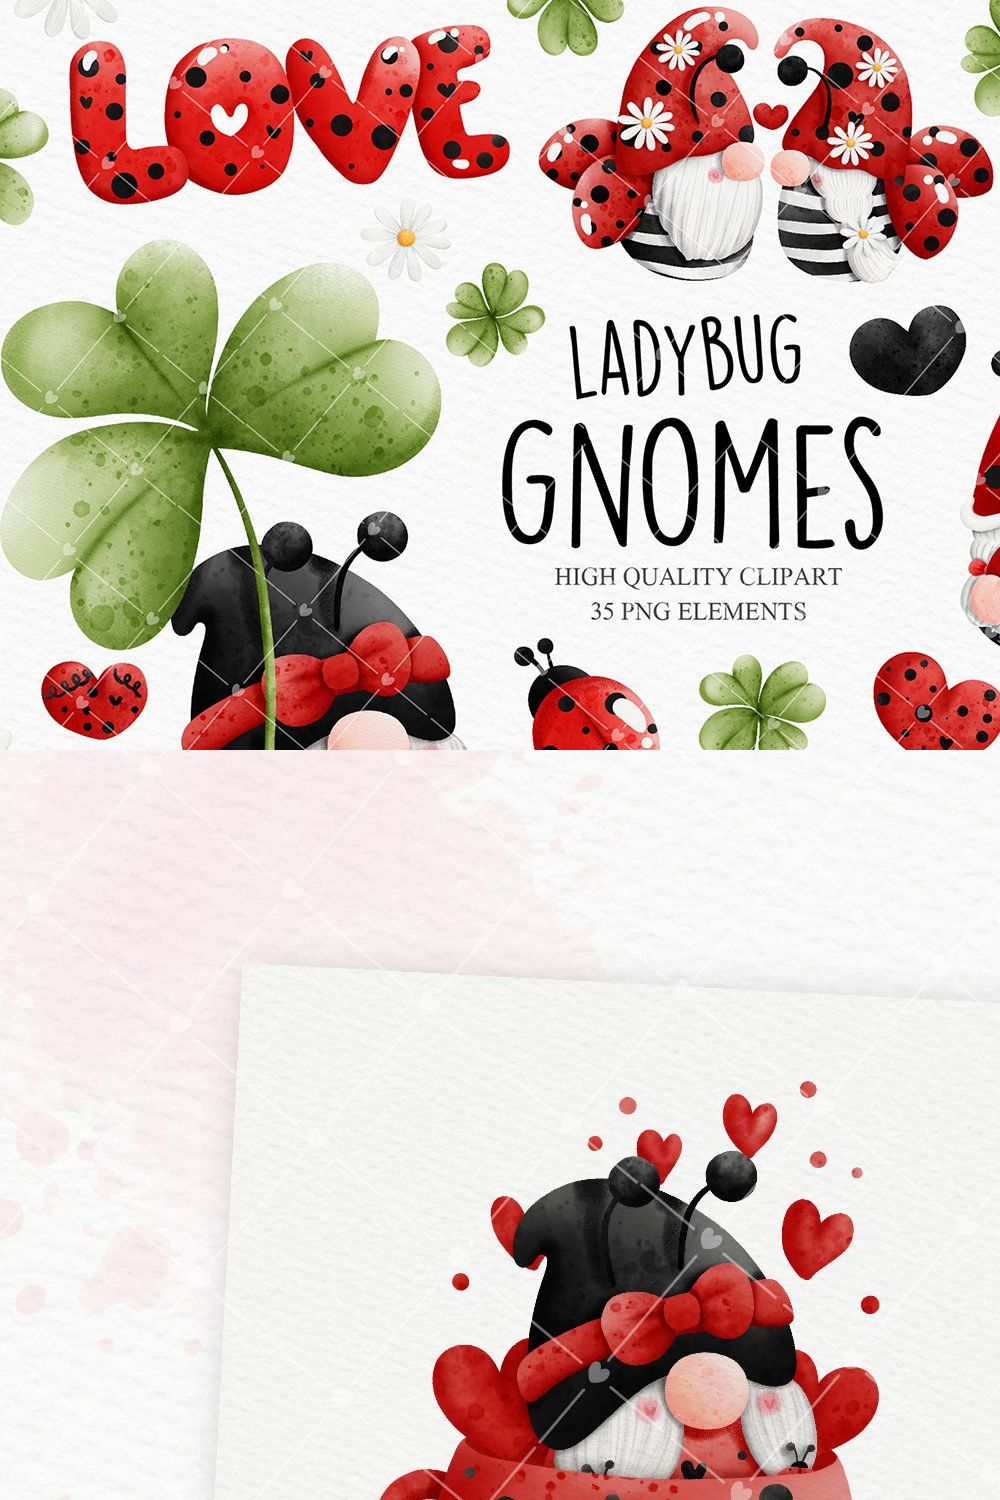 Gnome ladybug clipart pinterest preview image.